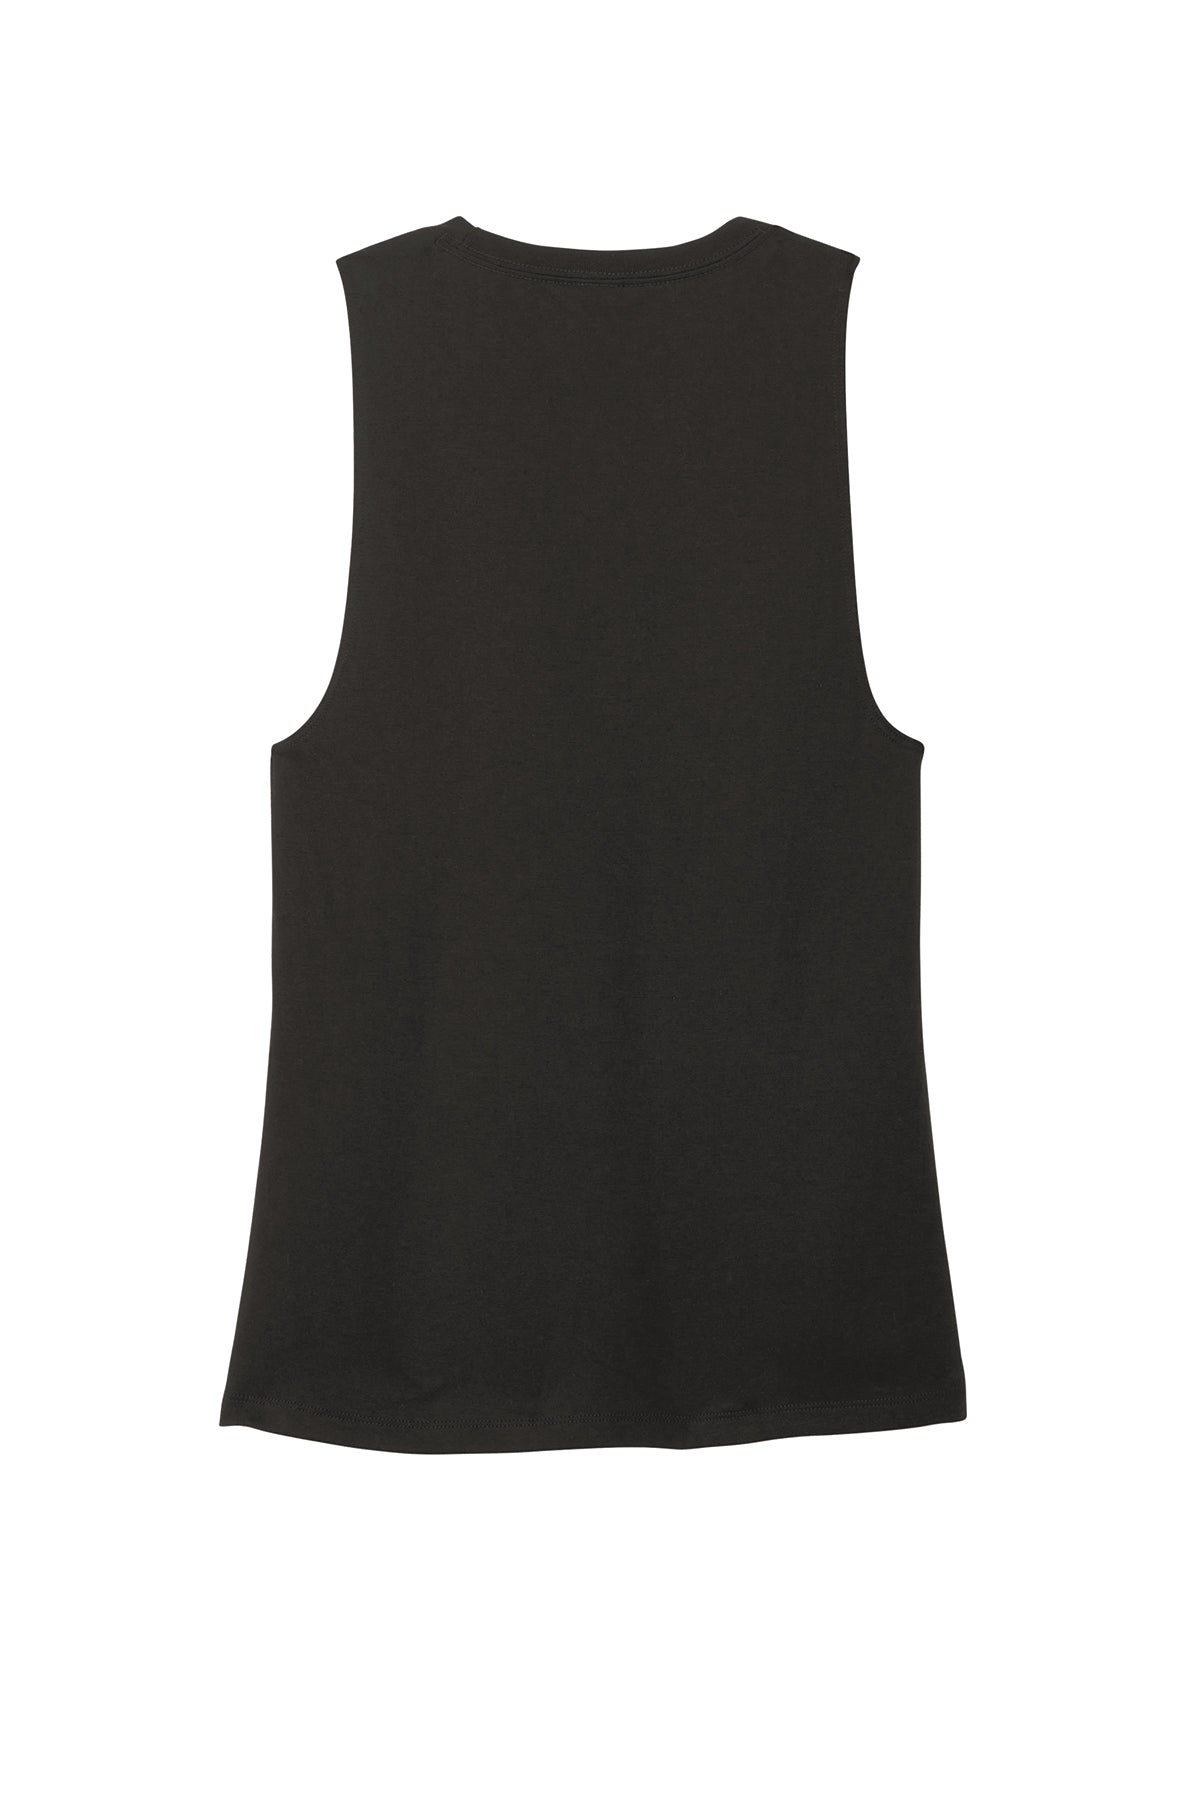 DT153 District® Women’s Perfect Tri® Muscle Tank